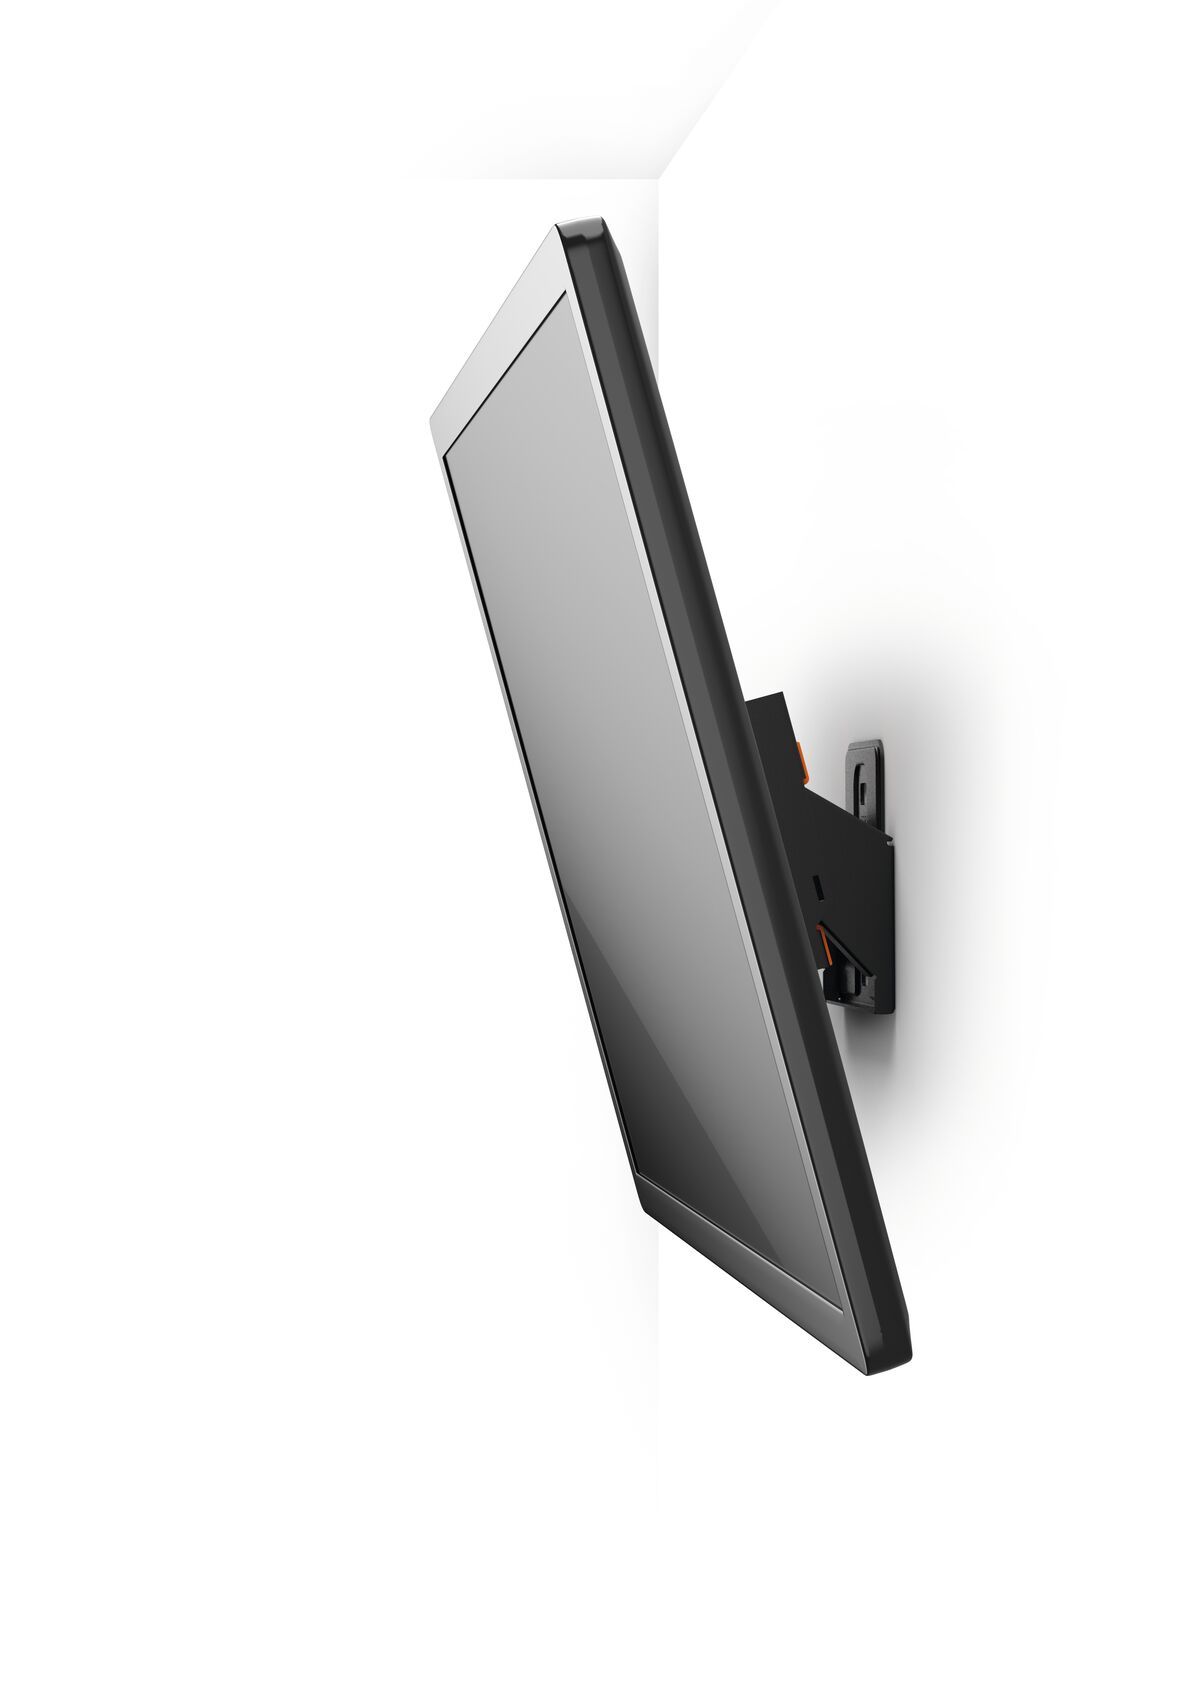 Vogel's WALL 3115 Tilting TV Wall Mount - Suitable for 19 up to 43 inch TVs up to Tilt up to 15° - White wall